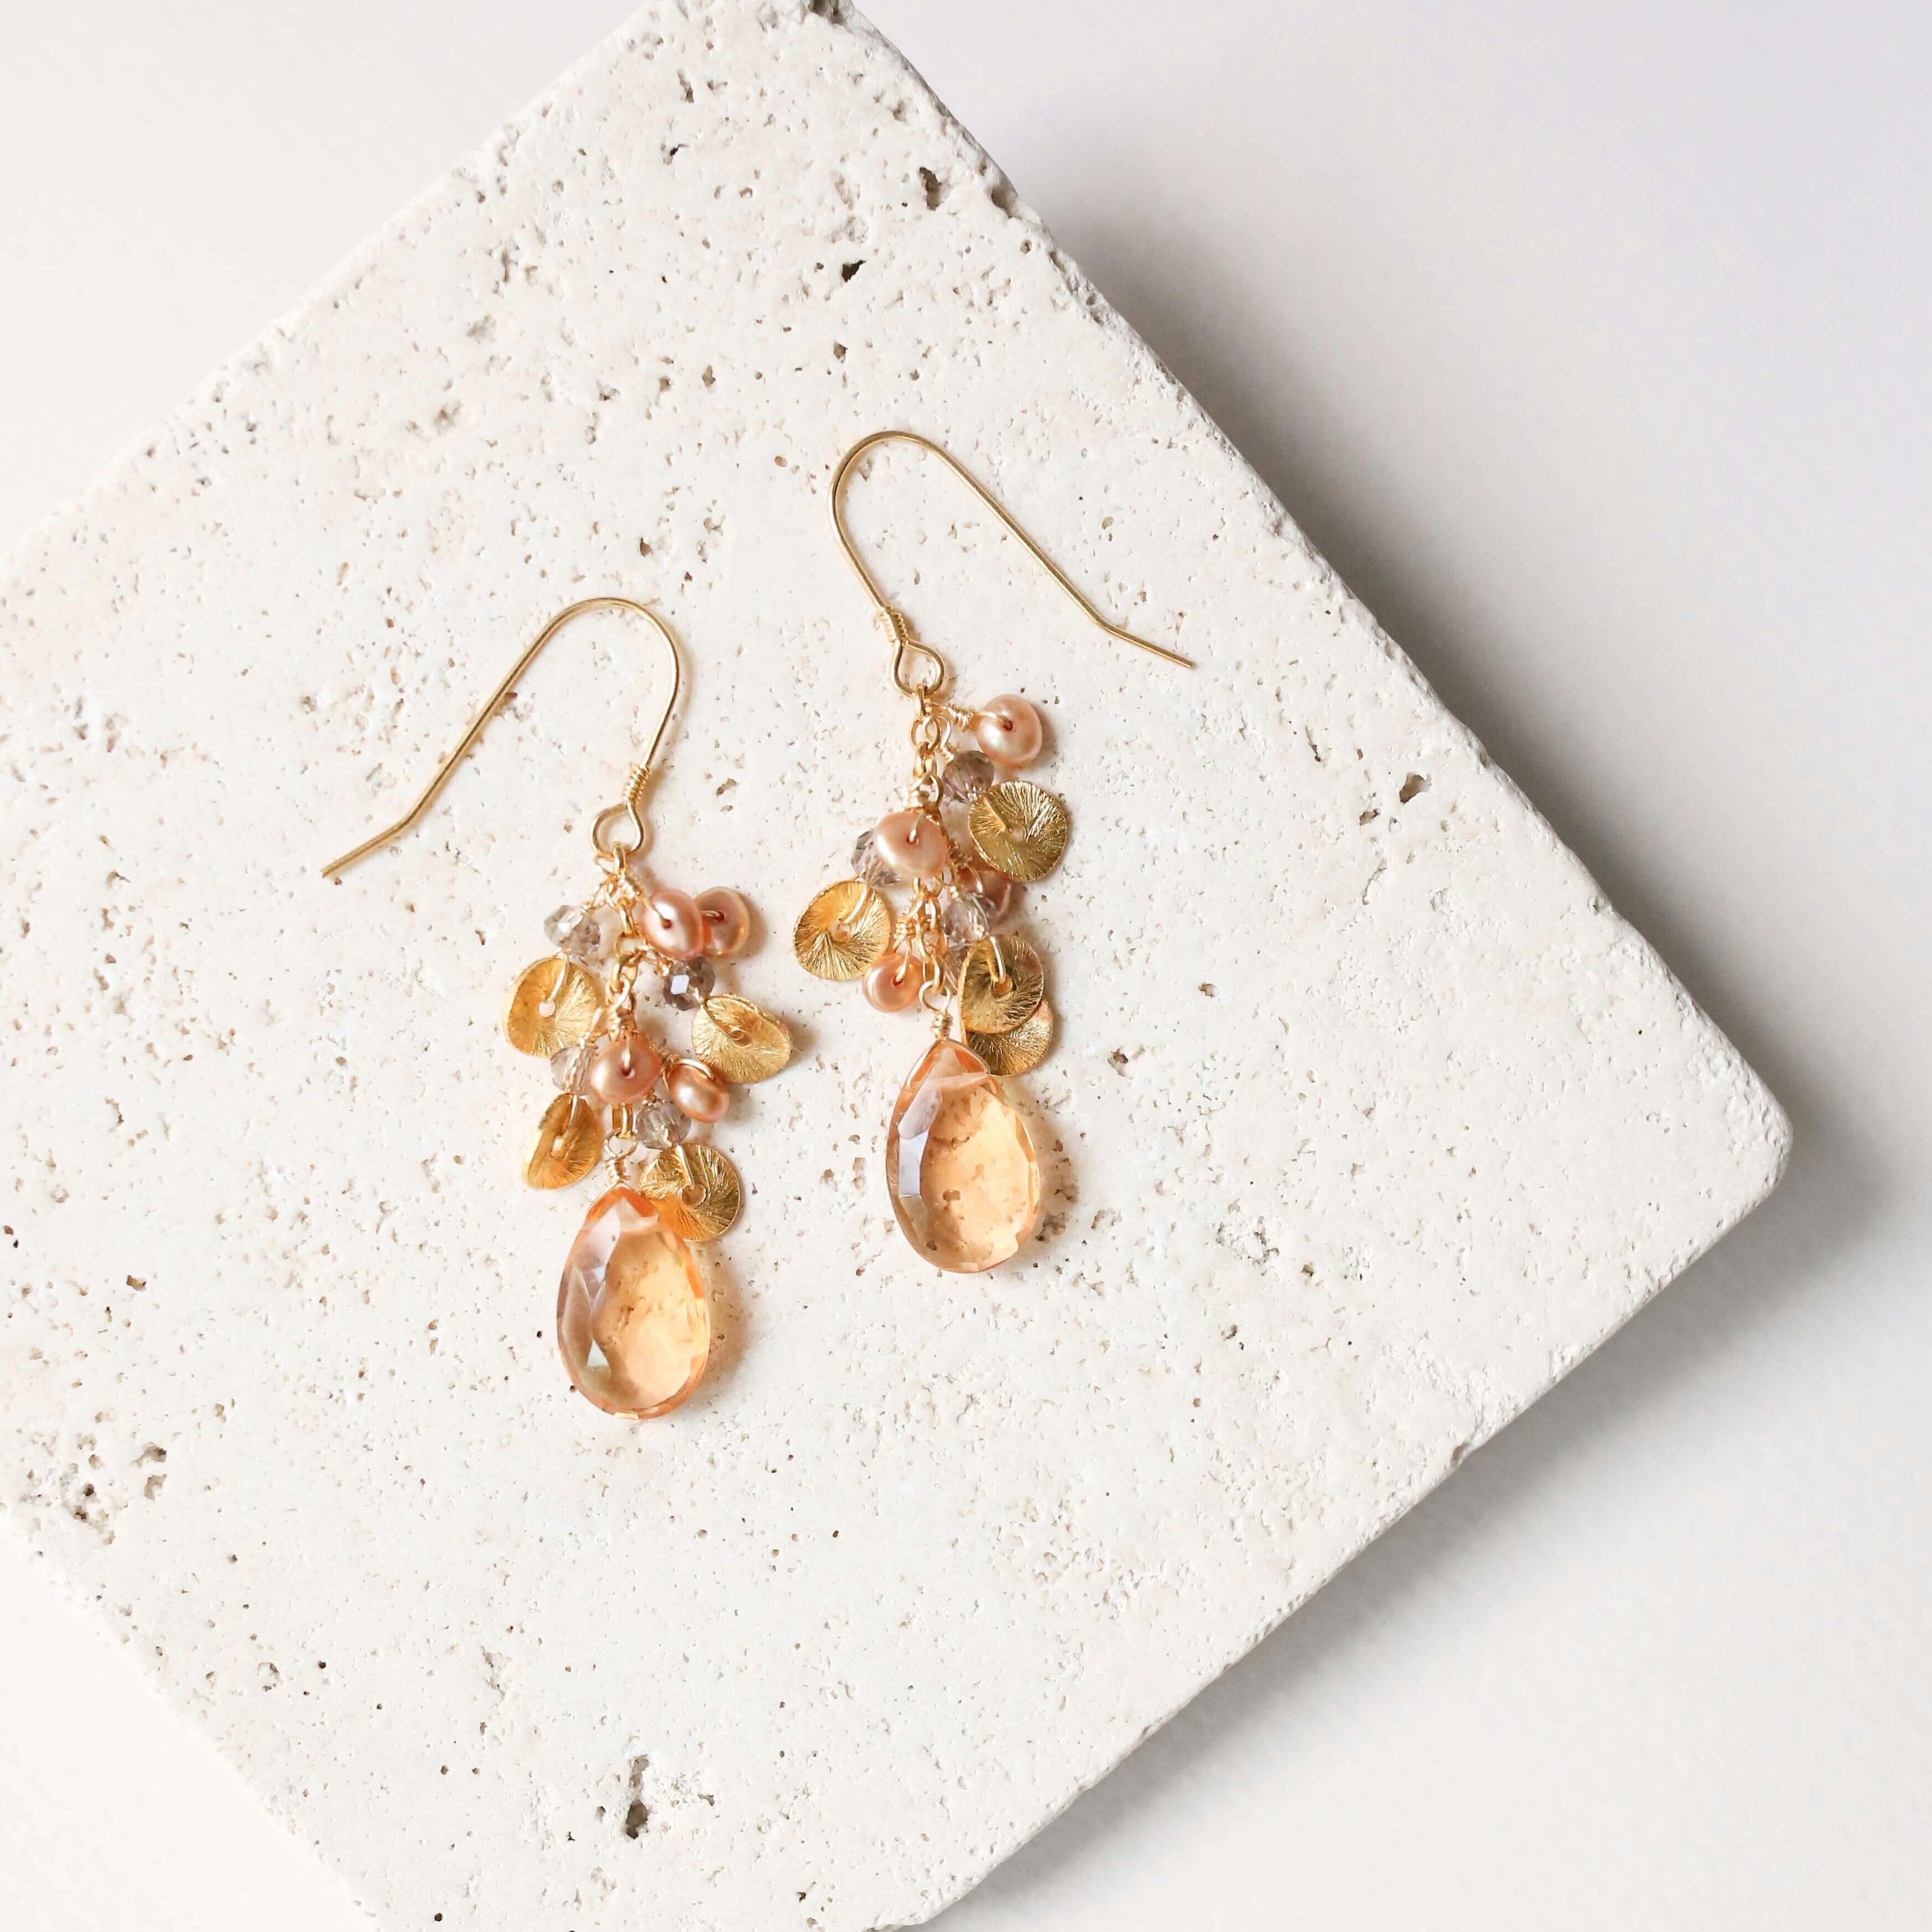 Citrine Gemstone with Pearls and Gold Accents   Gold Drop Earrings